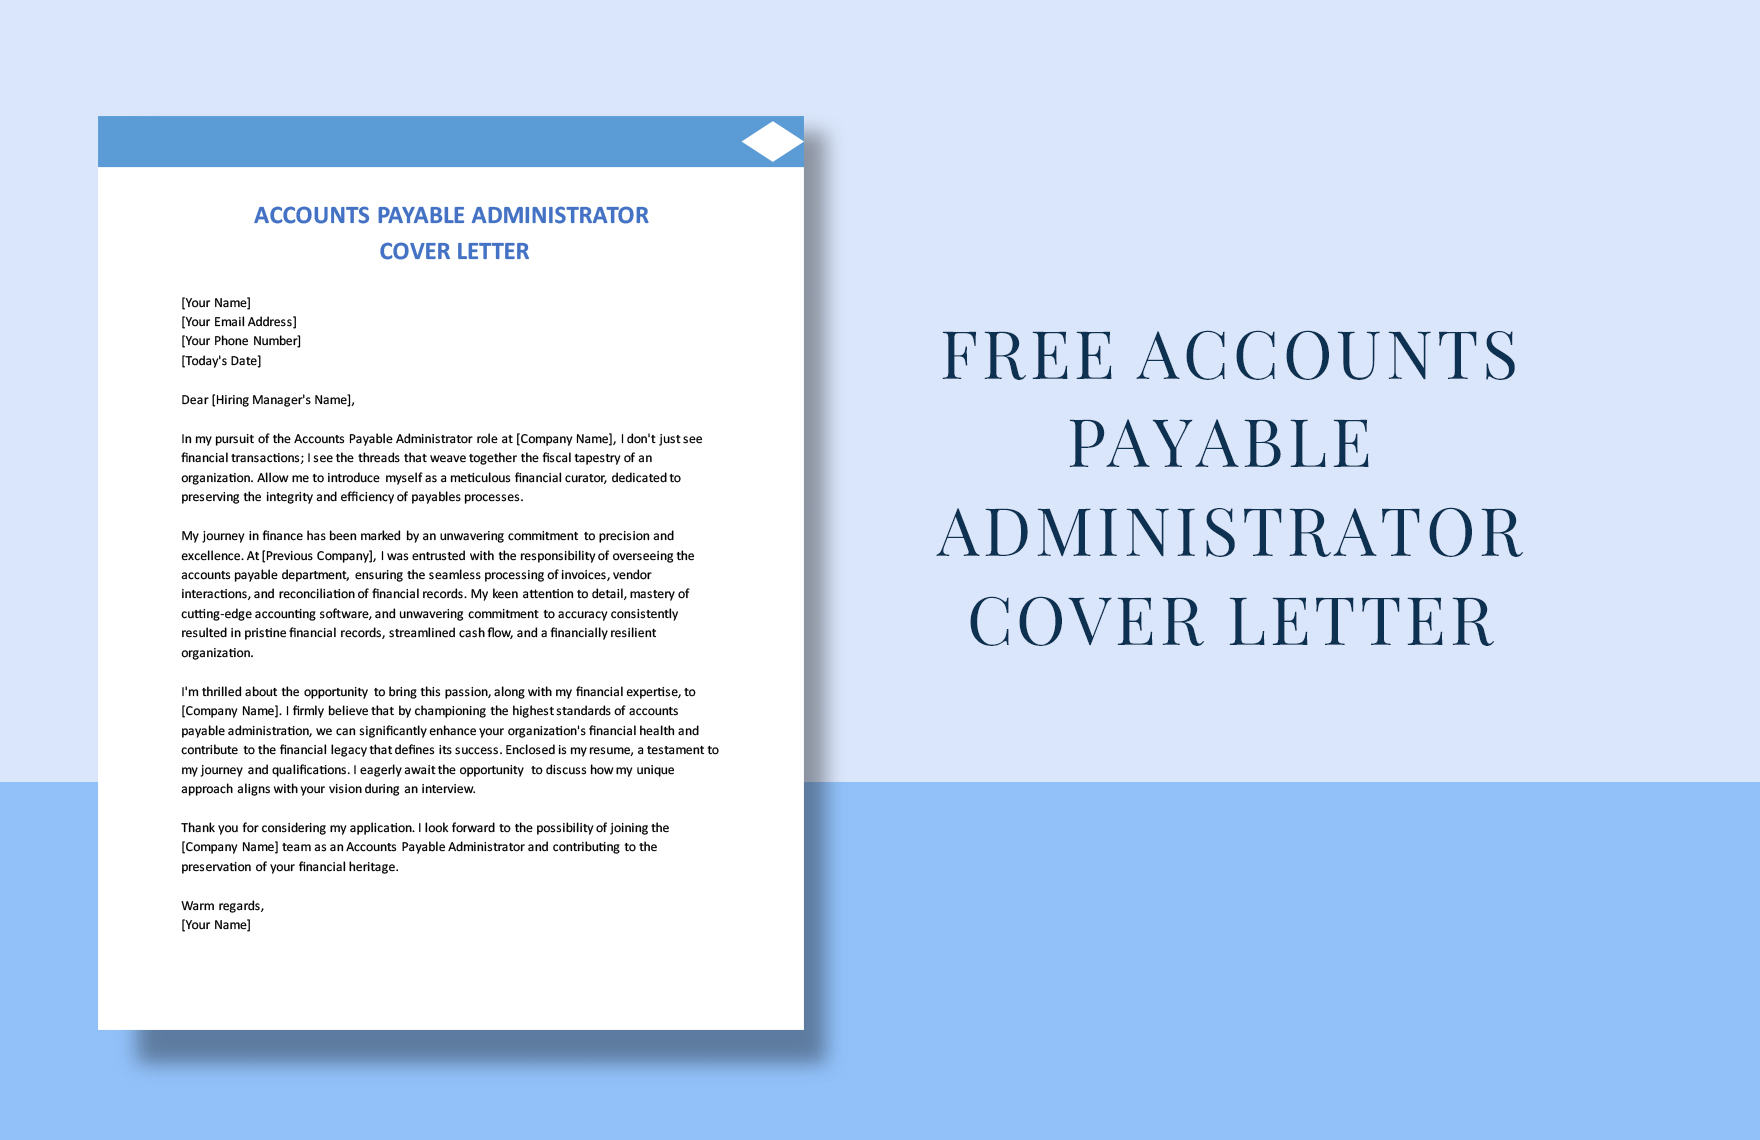 Accounts Payable Administrator Cover Letter